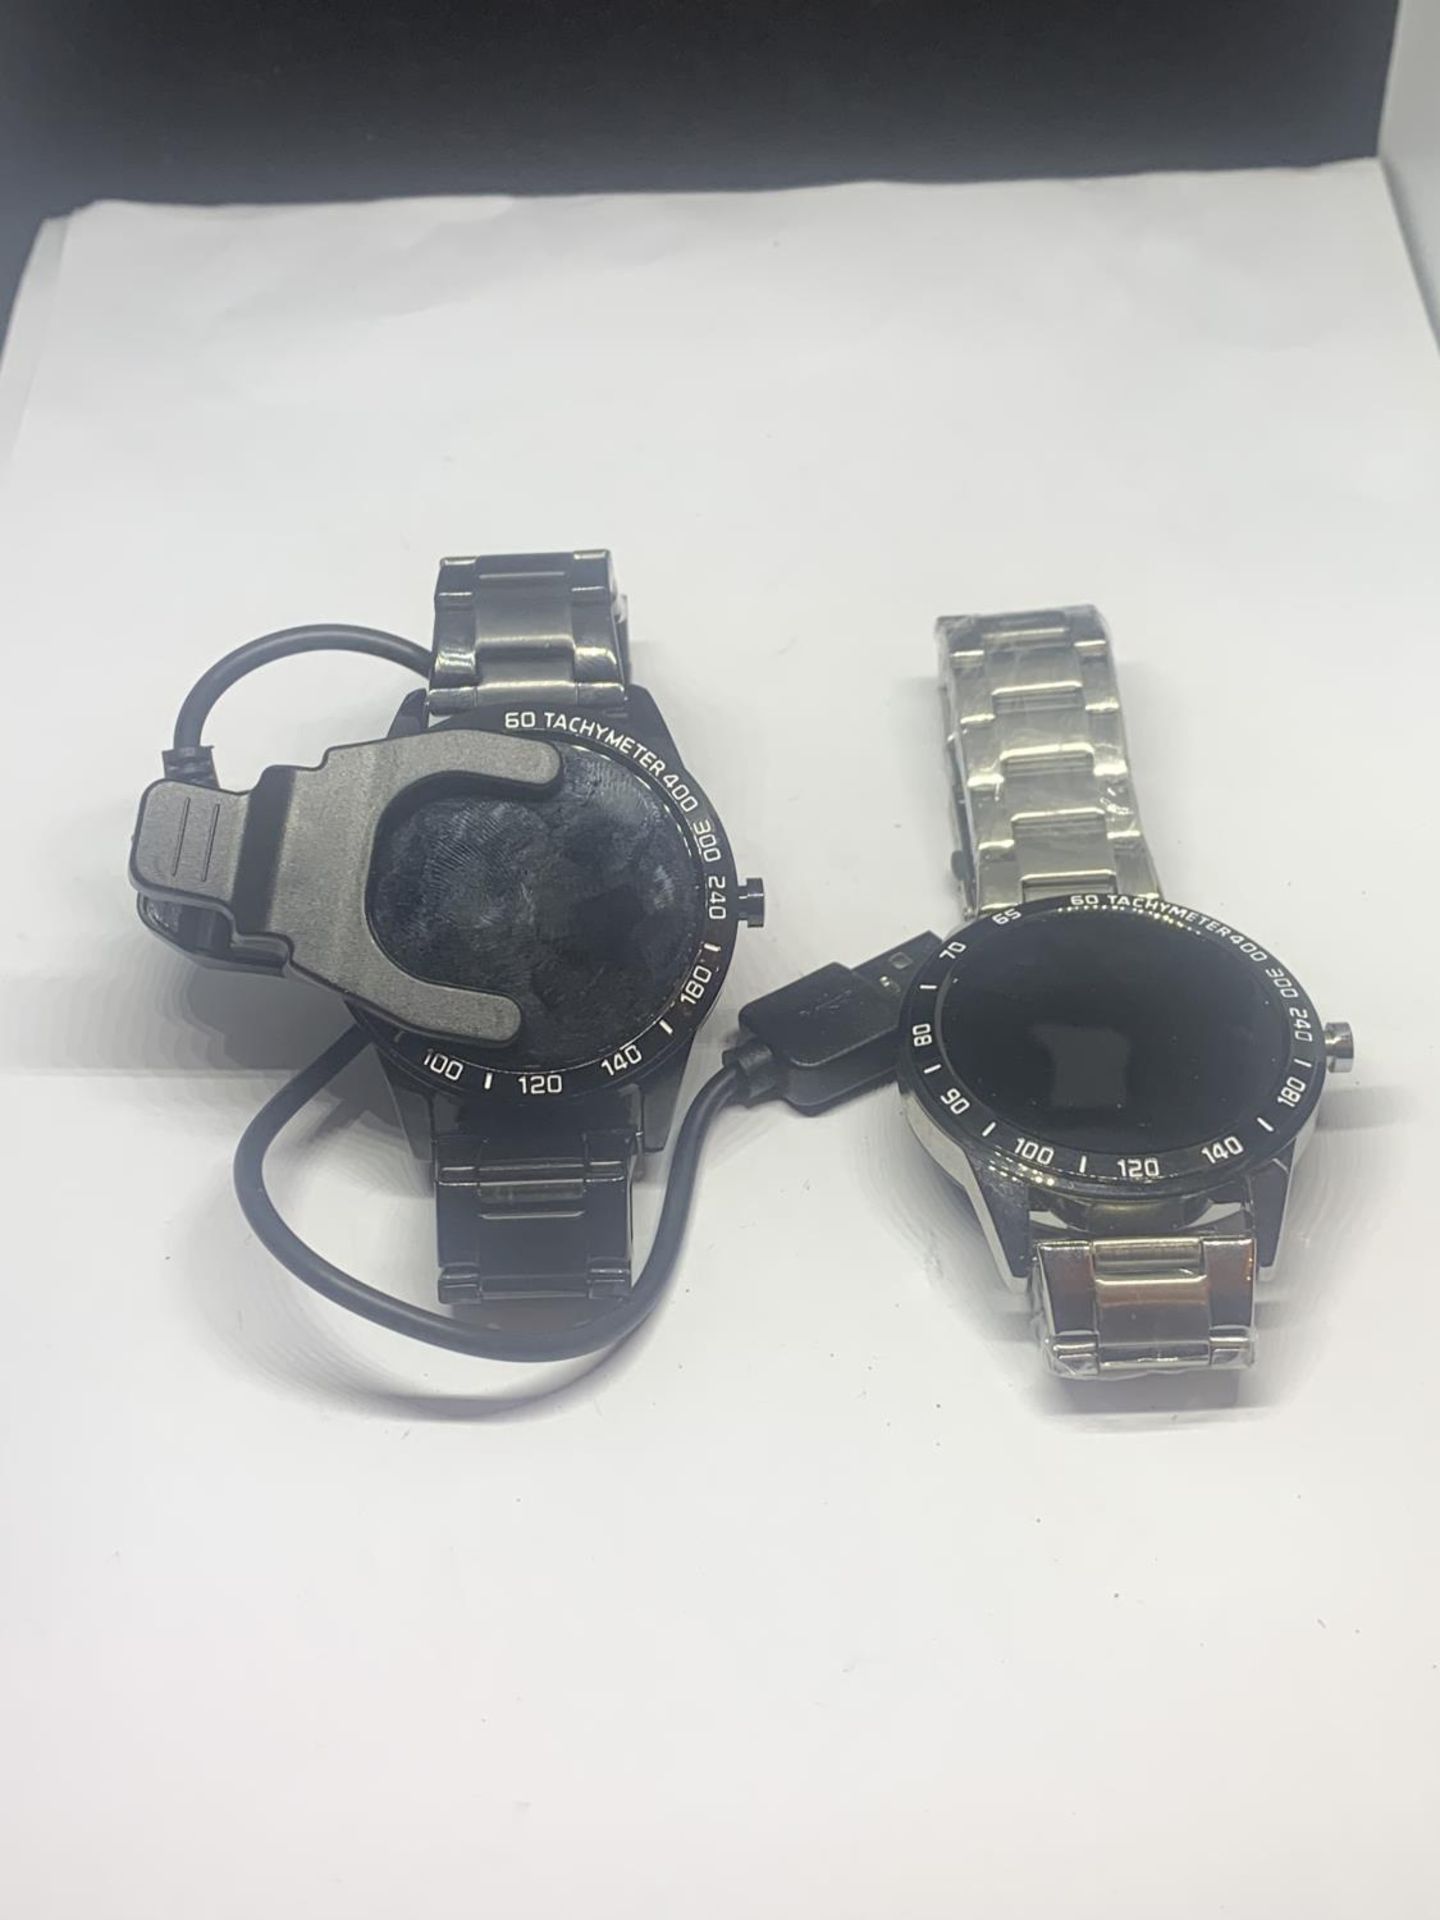 TWO WRIST WATCHES TACHYMETER 400 HEART RATE SMART BRACELET ONE WITH A USB LEAD